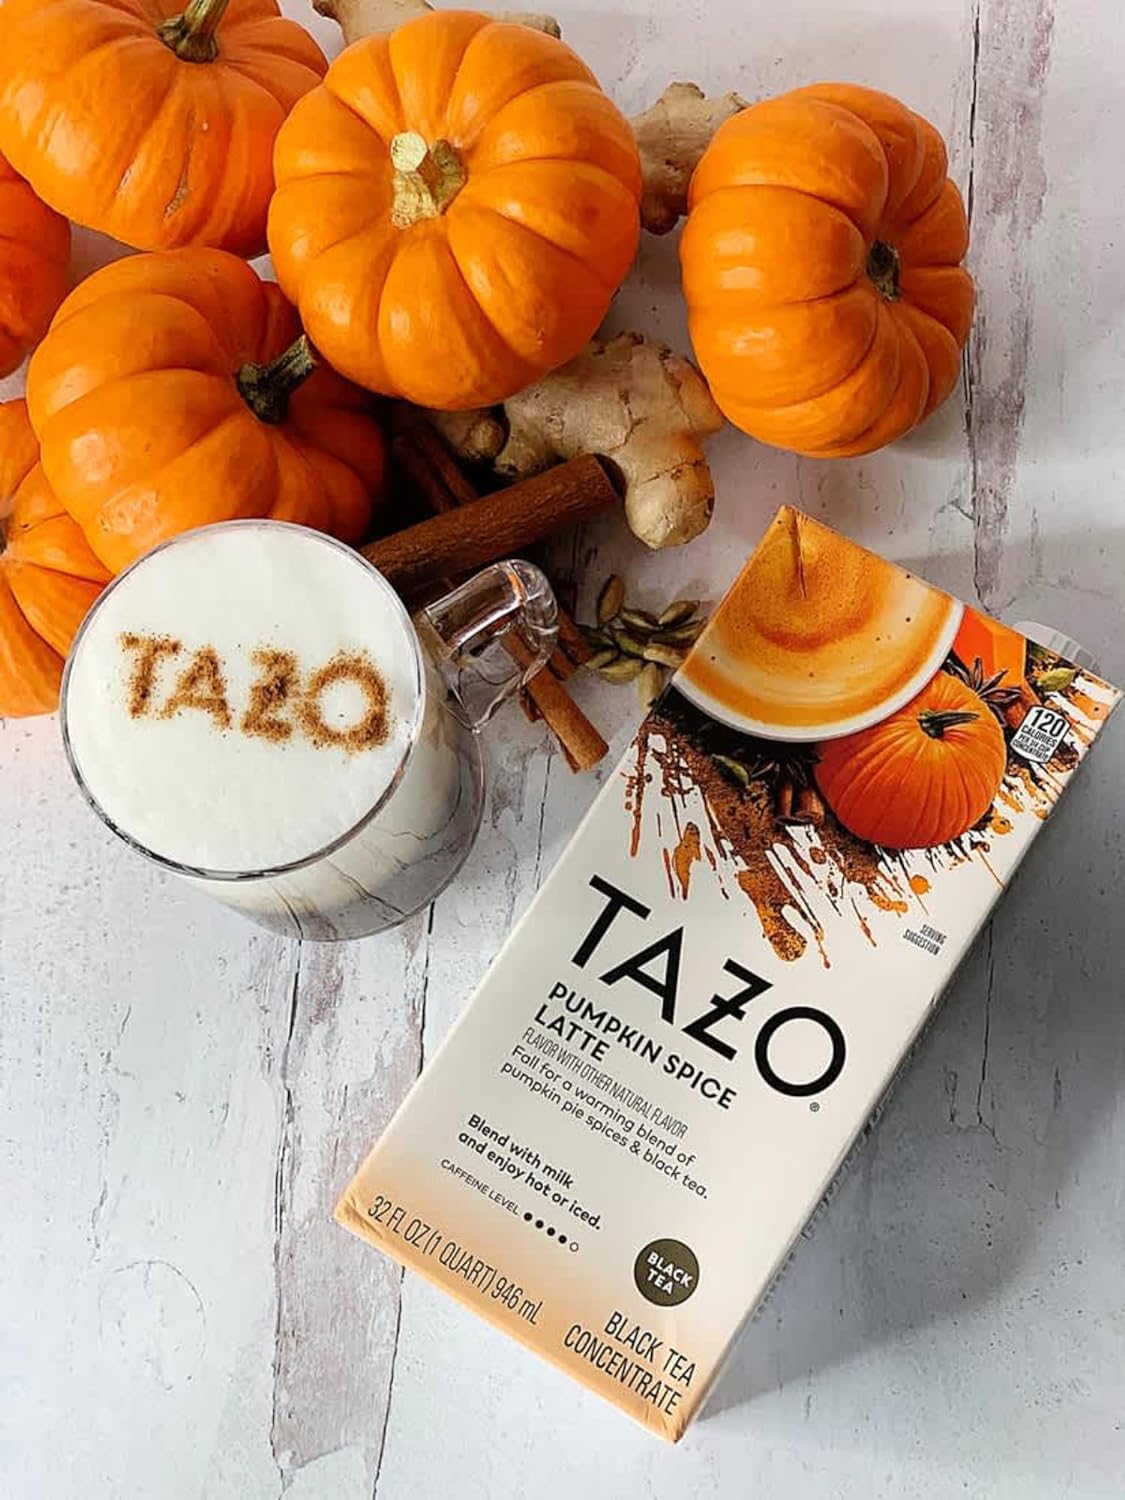 TAZO Pumpkin Spice Latte Black Tea Concentrate, 32 oz (Pack of 2) with By The Cup Coasters : Grocery & Gourmet Food